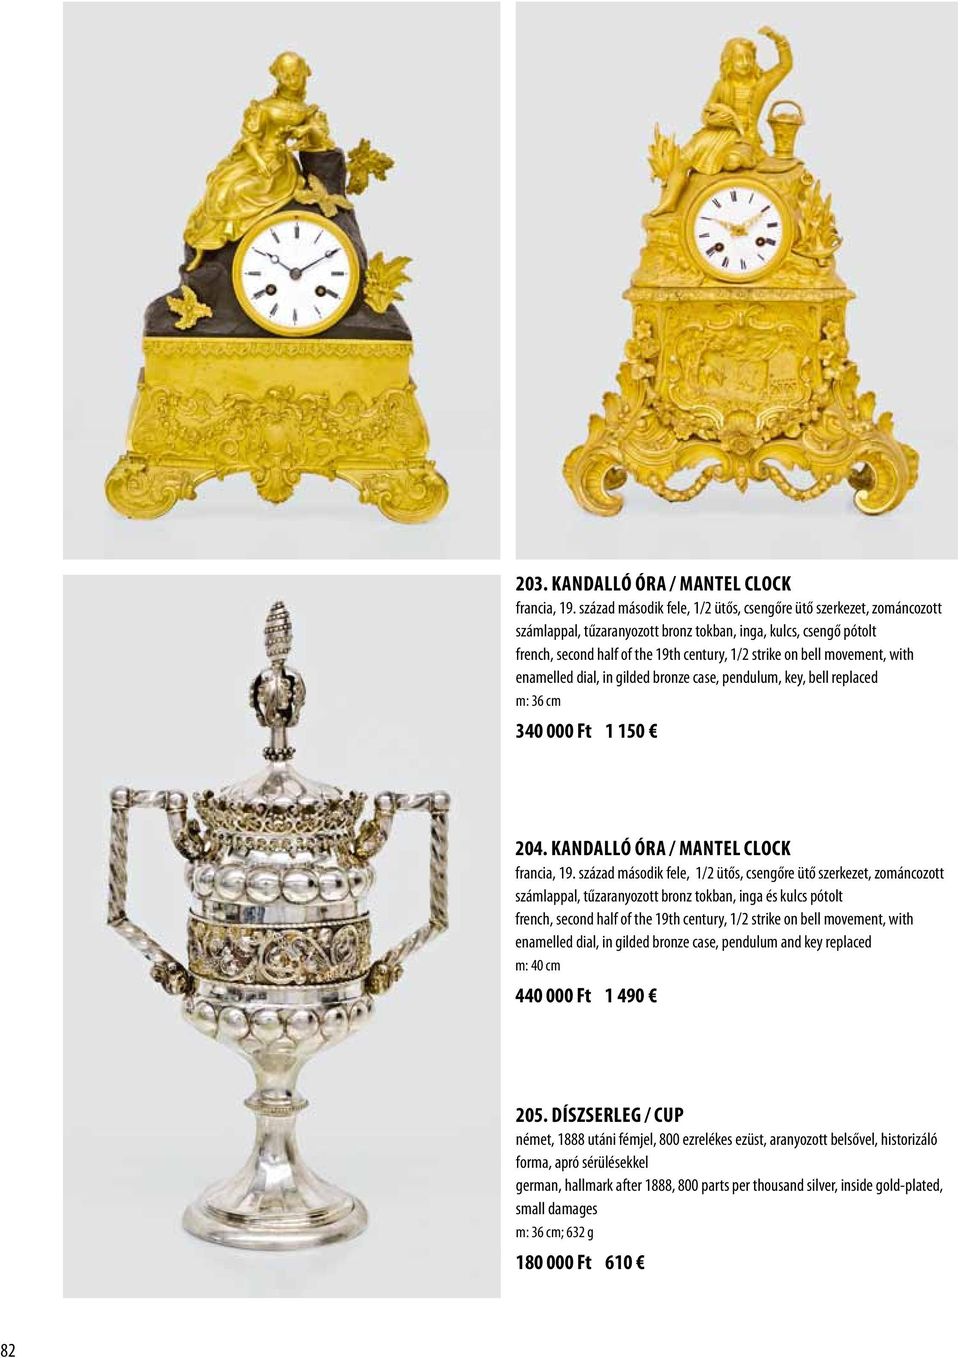 movement, with enamelled dial, in gilded bronze case, pendulum, key, bell replaced m: 36 cm 340 000 Ft 1 150 204. Kandalló óra / Mantel clock francia, 19.